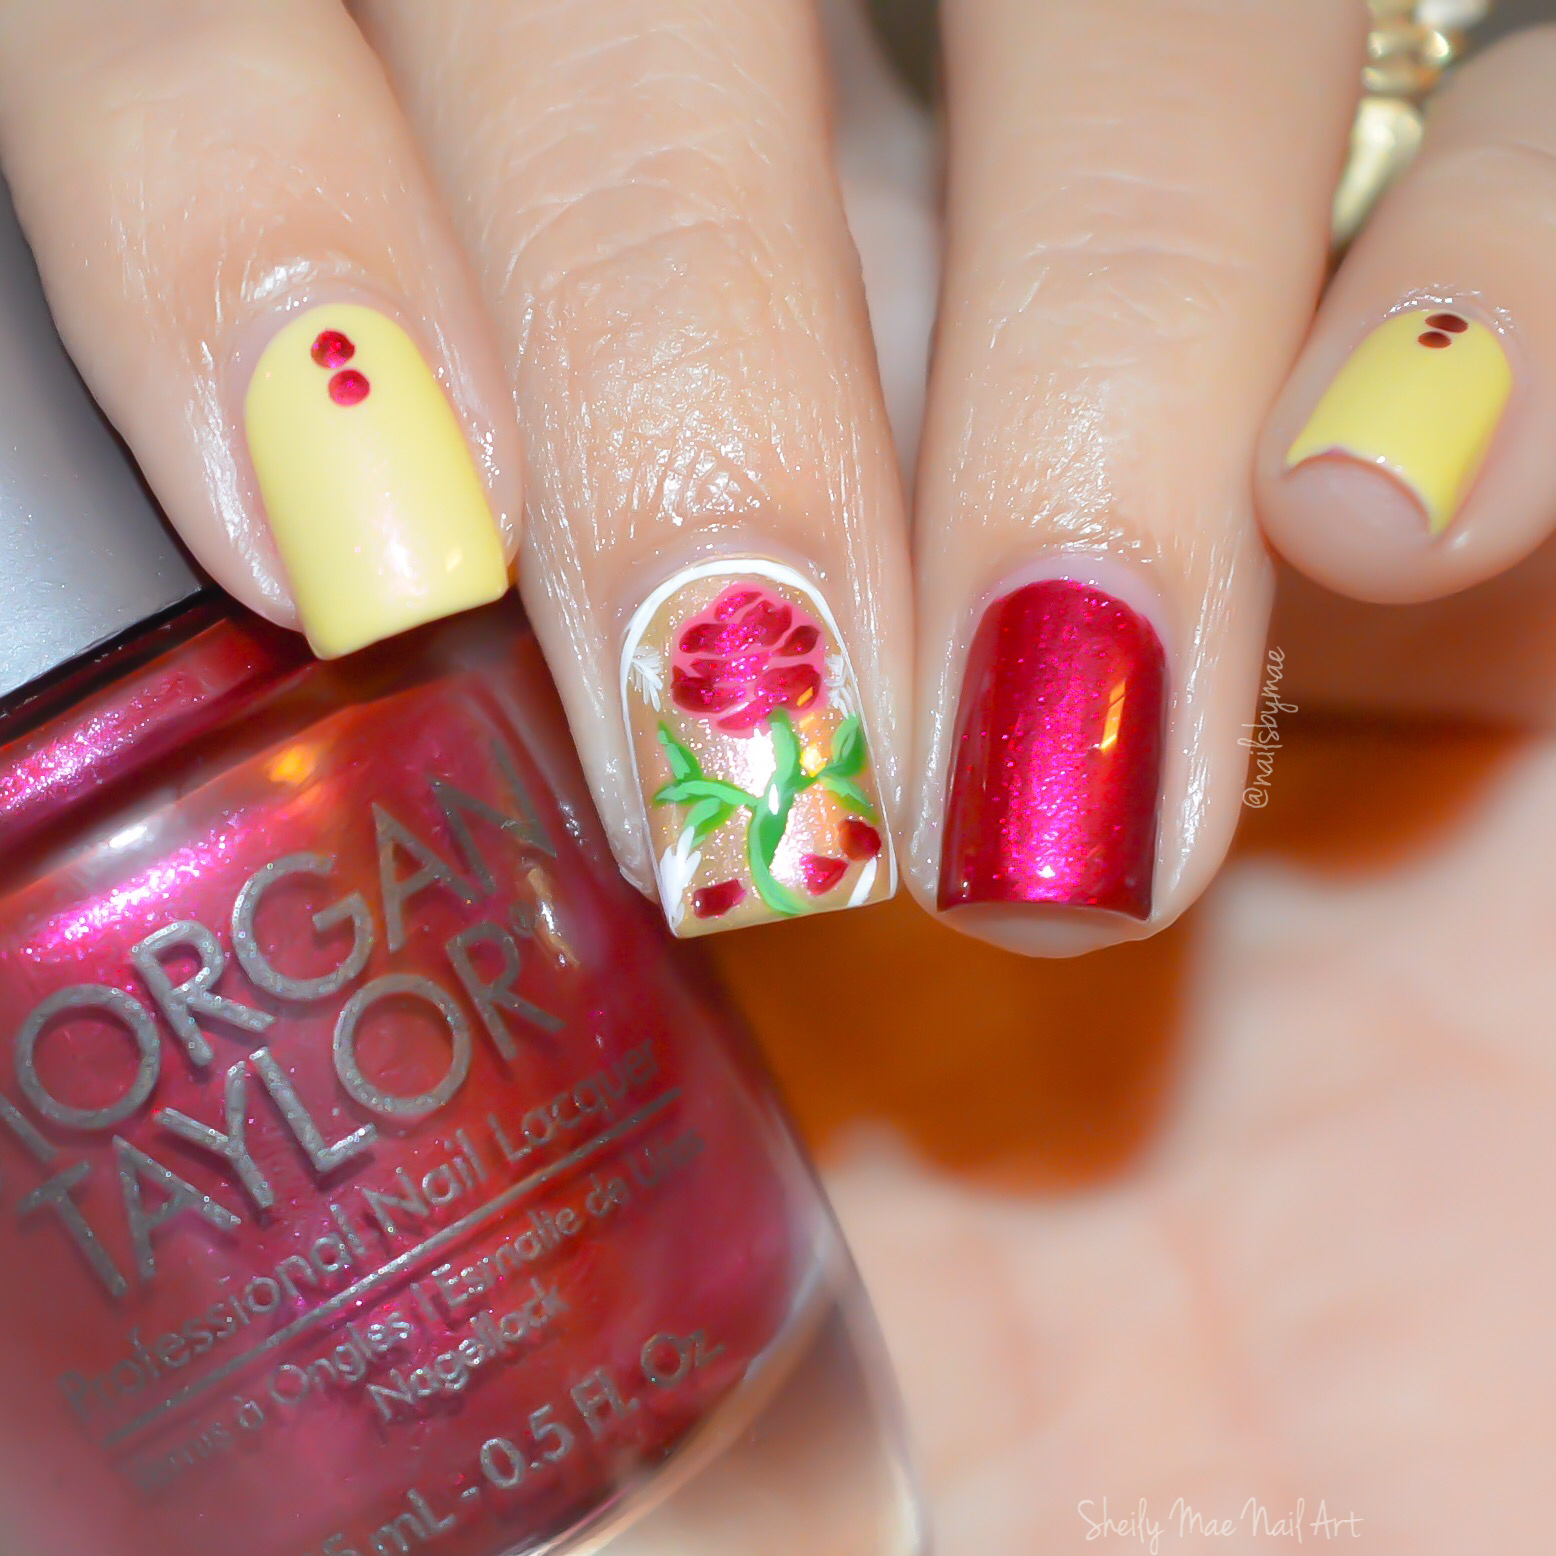 Beauty and the Beast Inspired Nail Art - Sheily Mae Nail Art